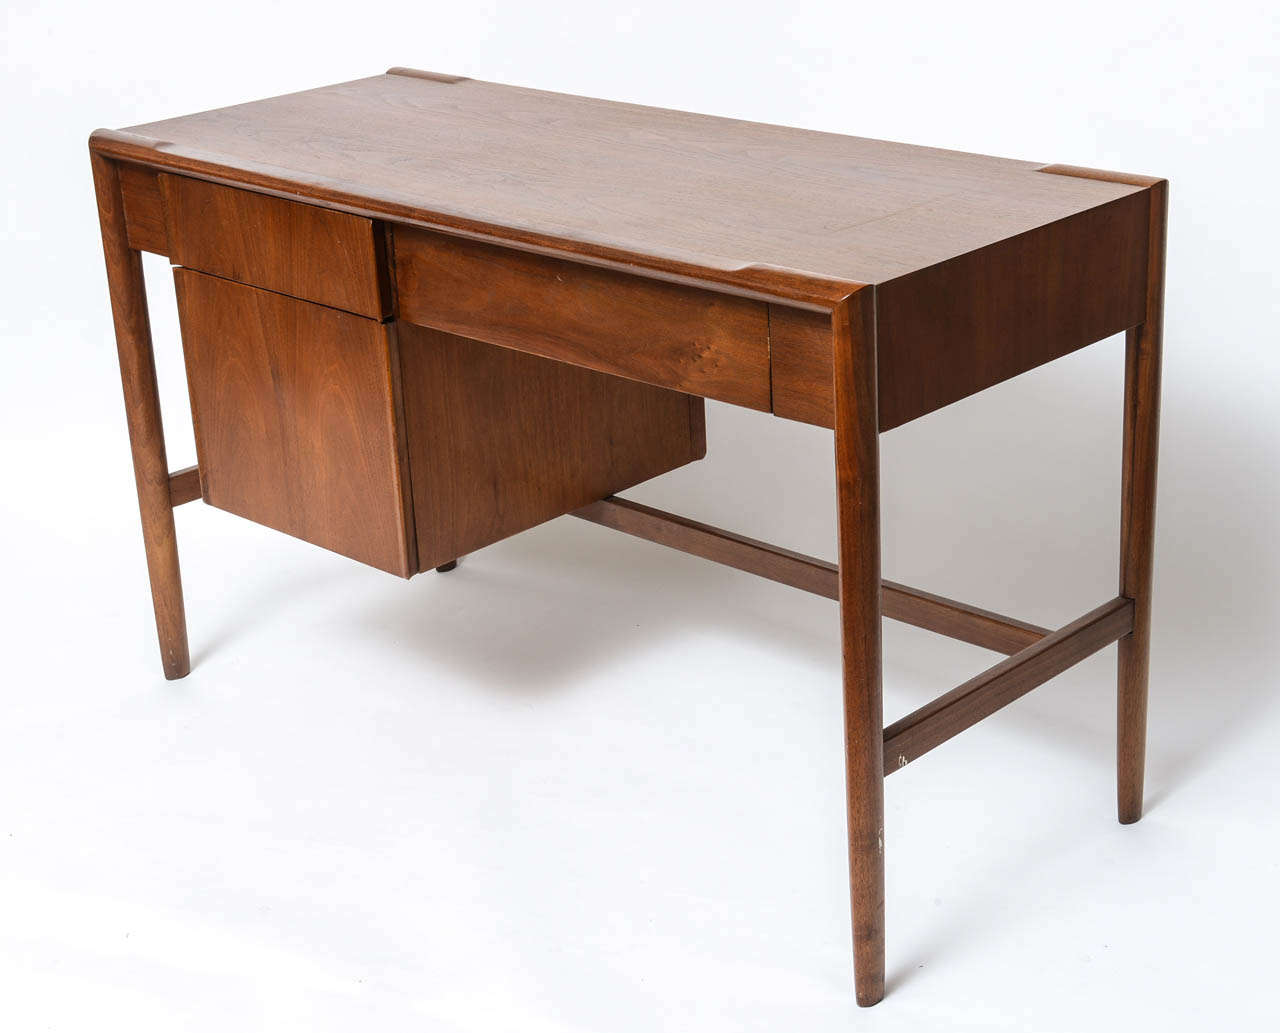 Beautiful sleek wooden desk by Drexel with 3 drawers.